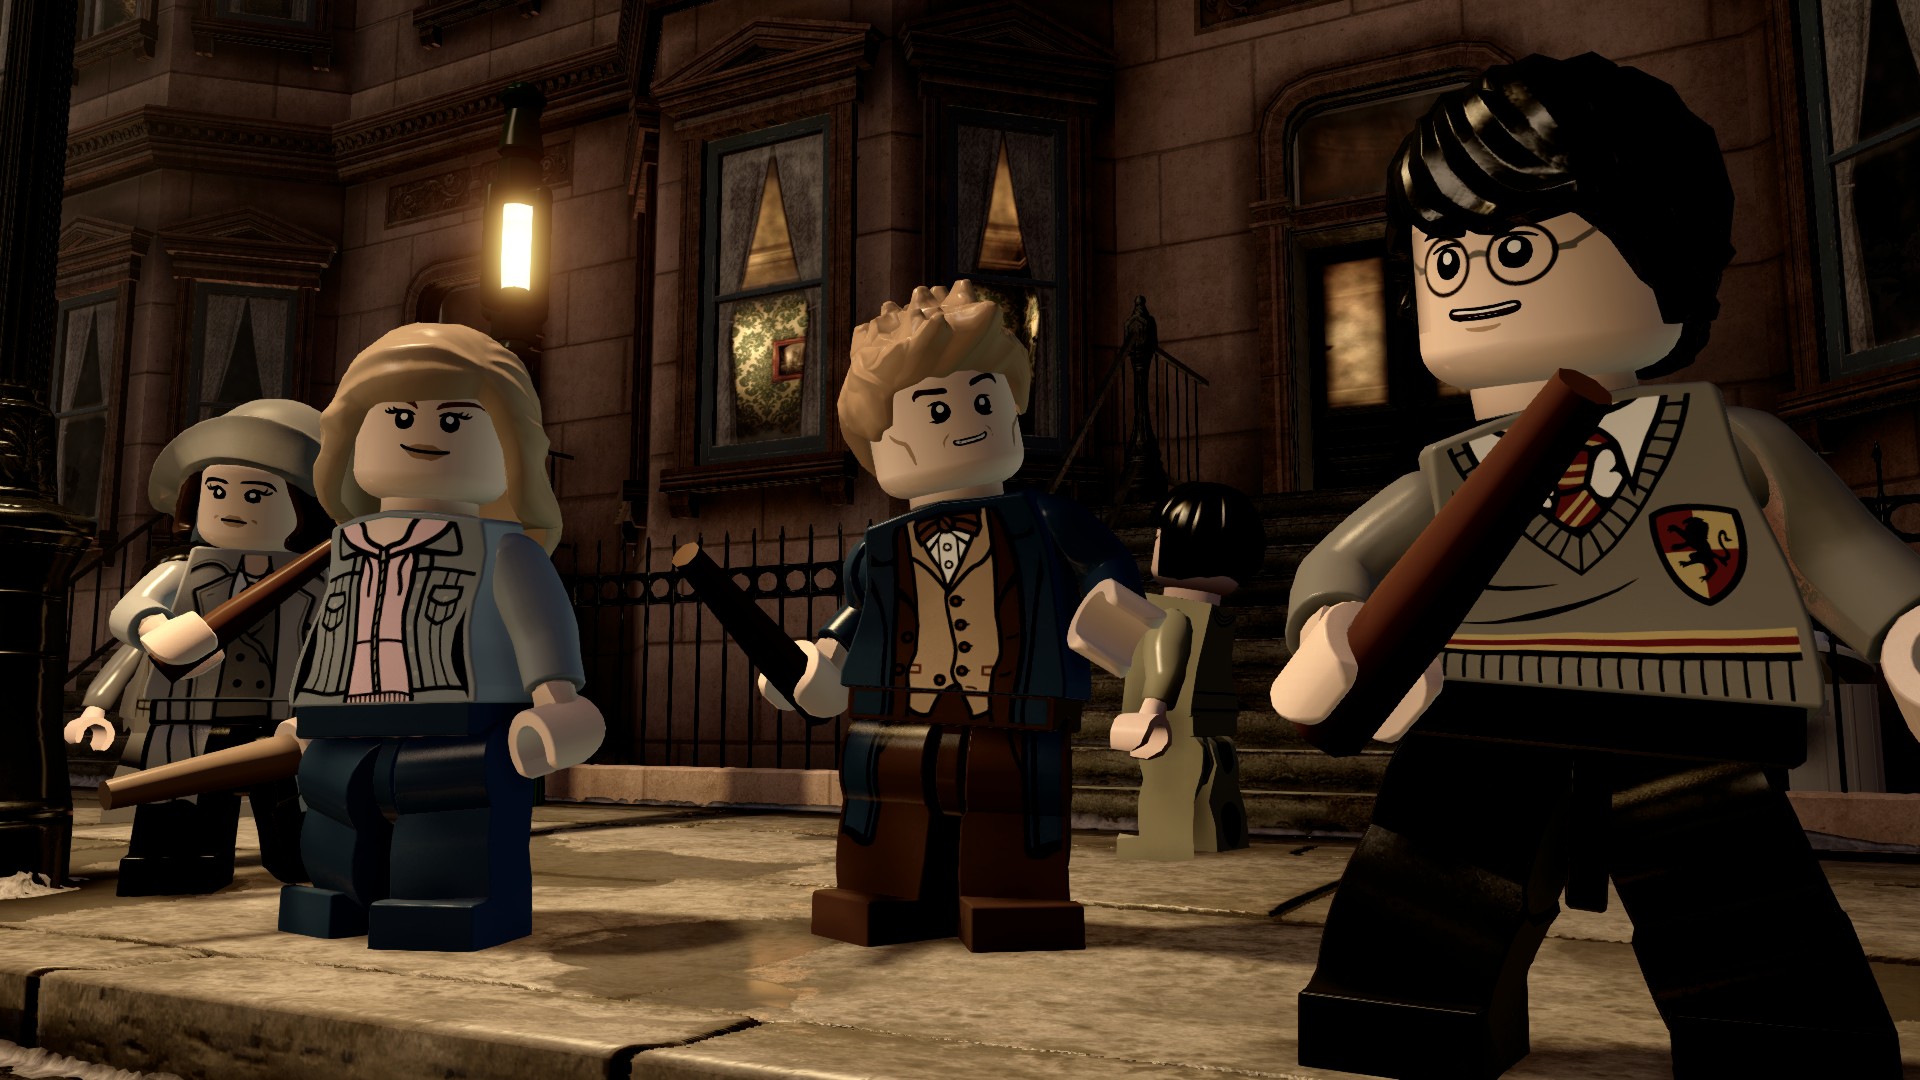 LEGO Dimensions Adds Expansion Packs Based on The Goonies, Harry Potter, and LEGO City ...